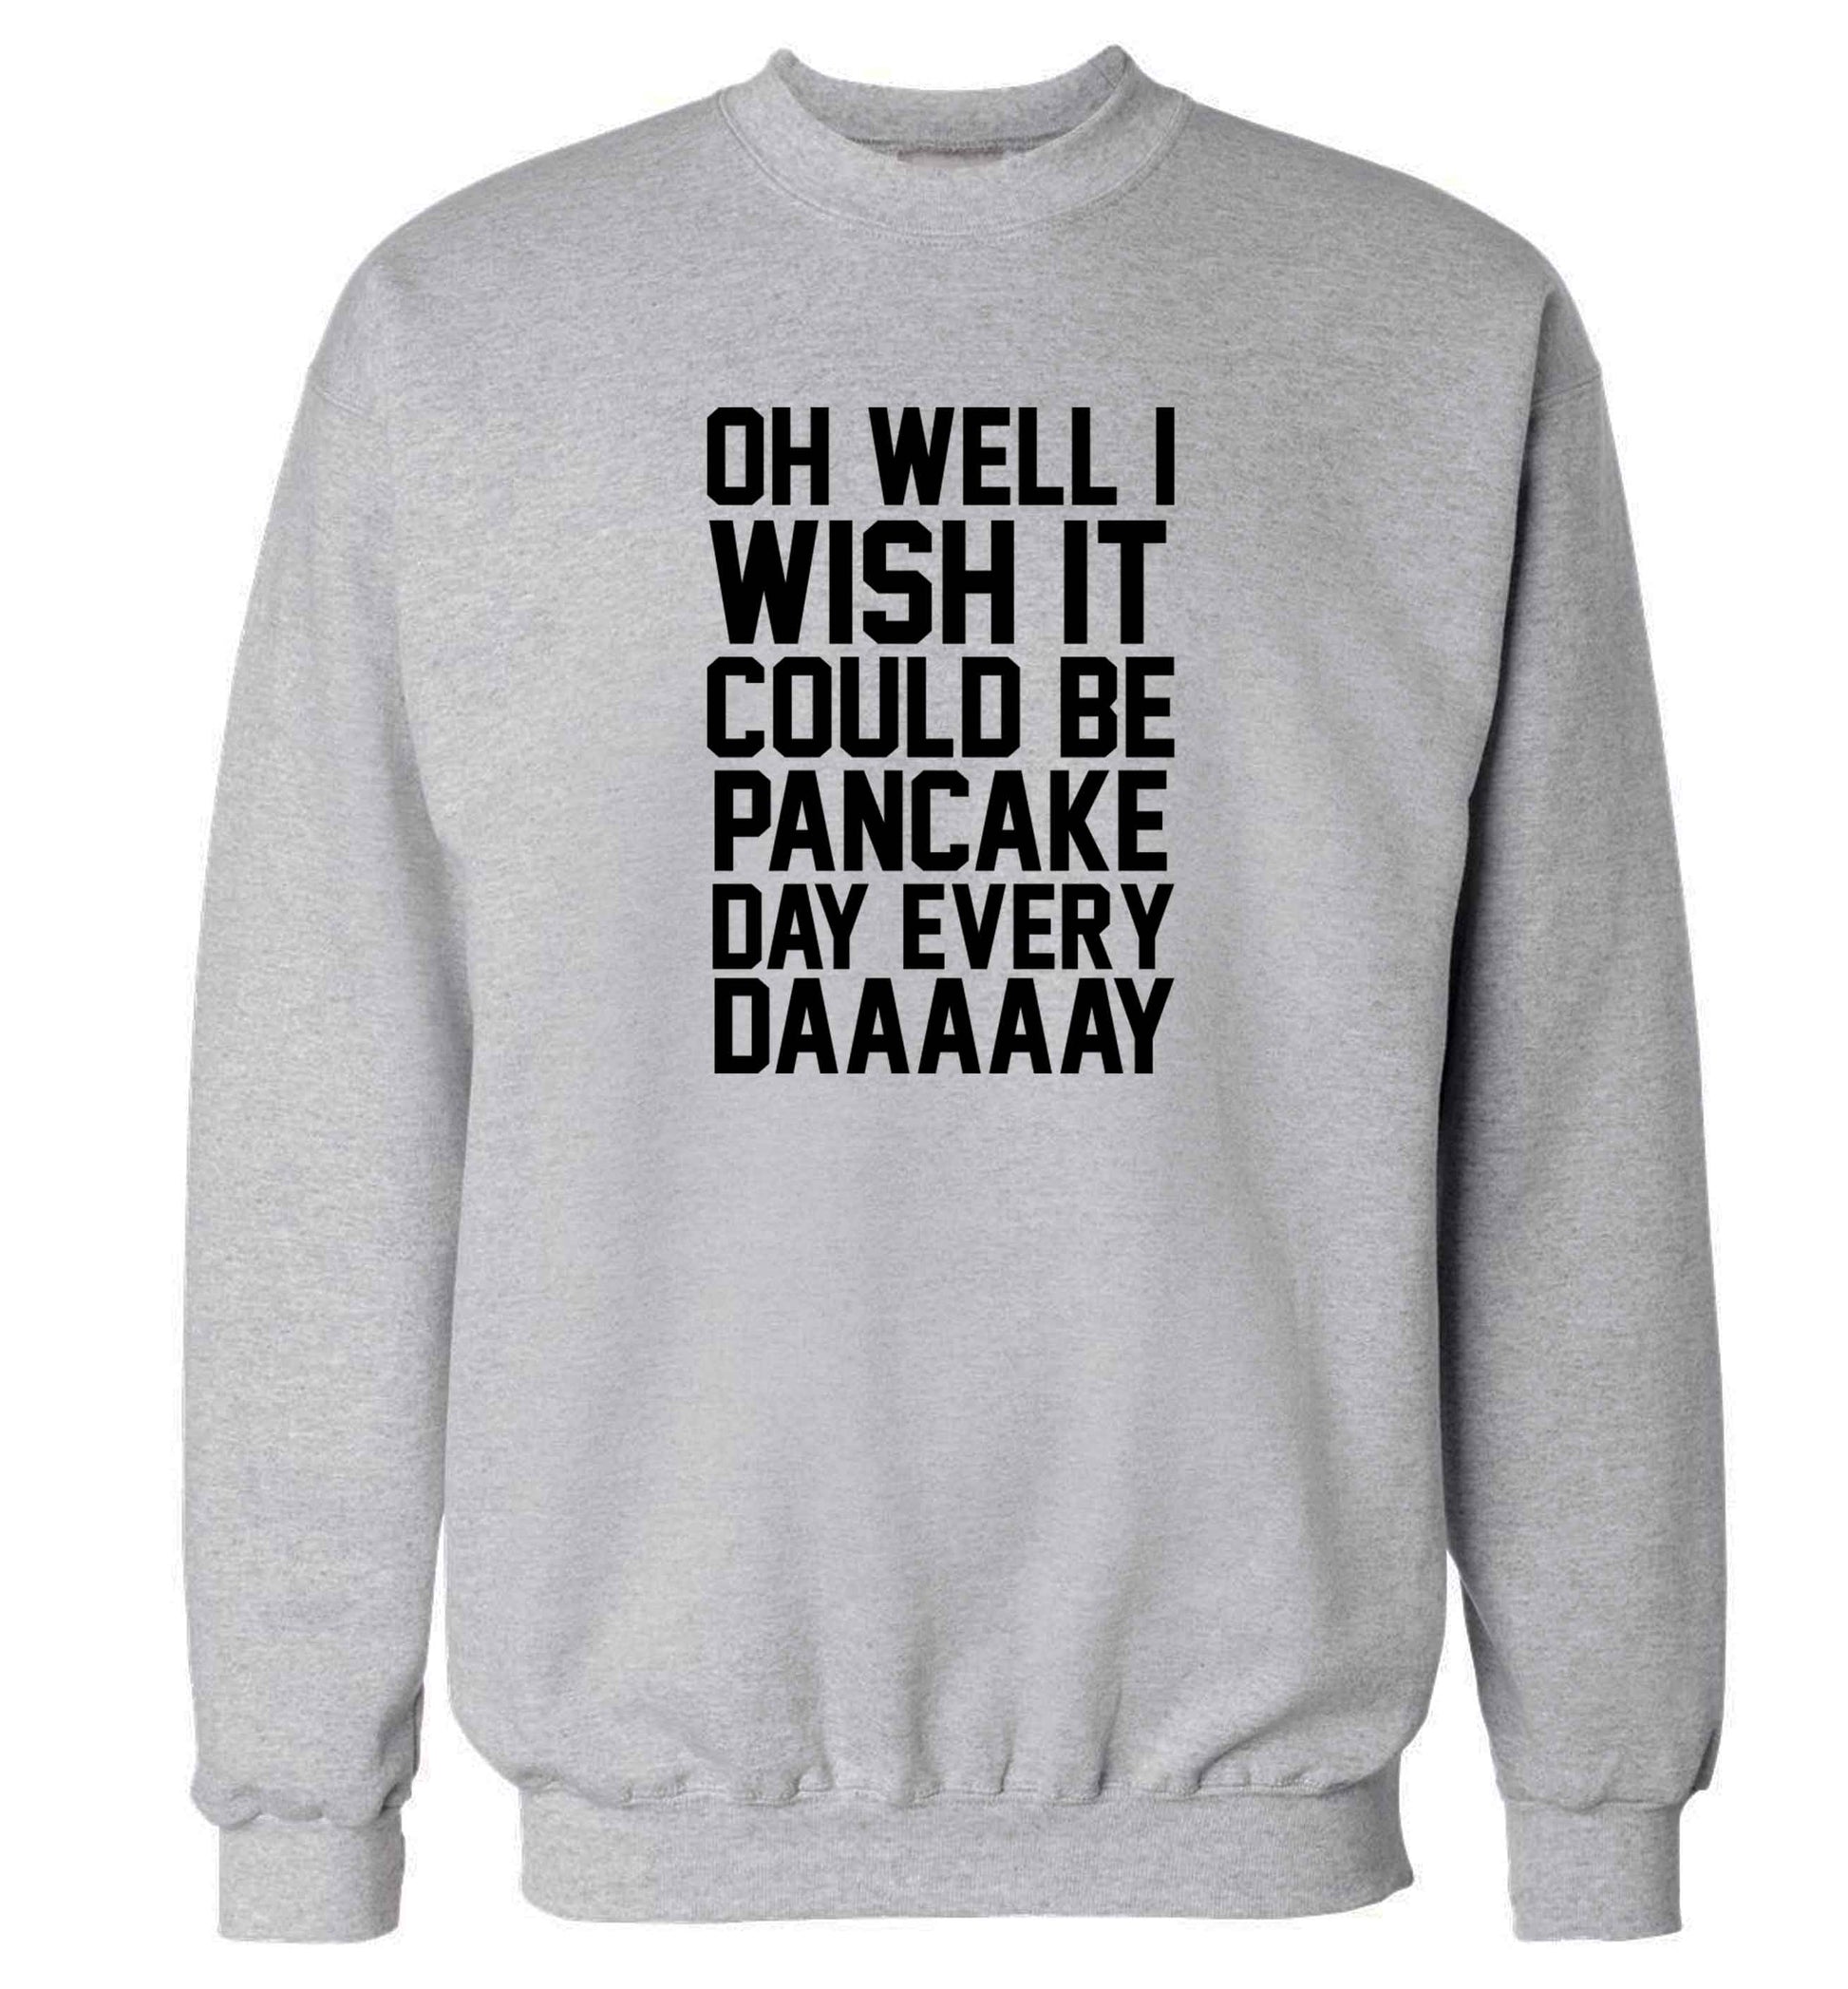 Oh well I wish it could be pancake day every day adult's unisex grey sweater 2XL